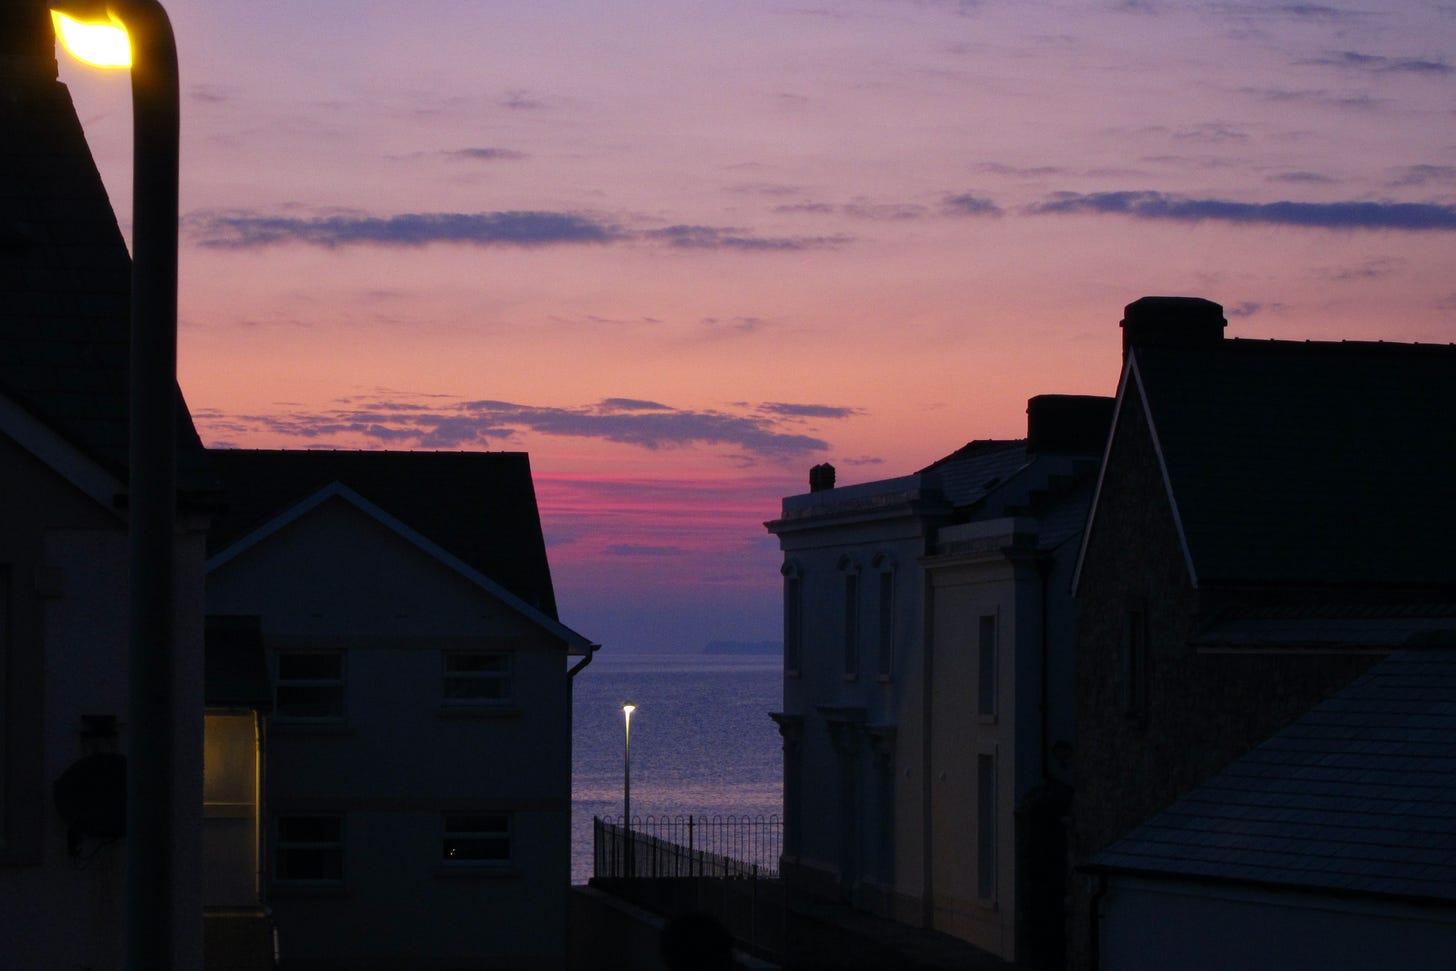 Sea view between buildings as darkness sets in. The sky has shades of pink and lavender